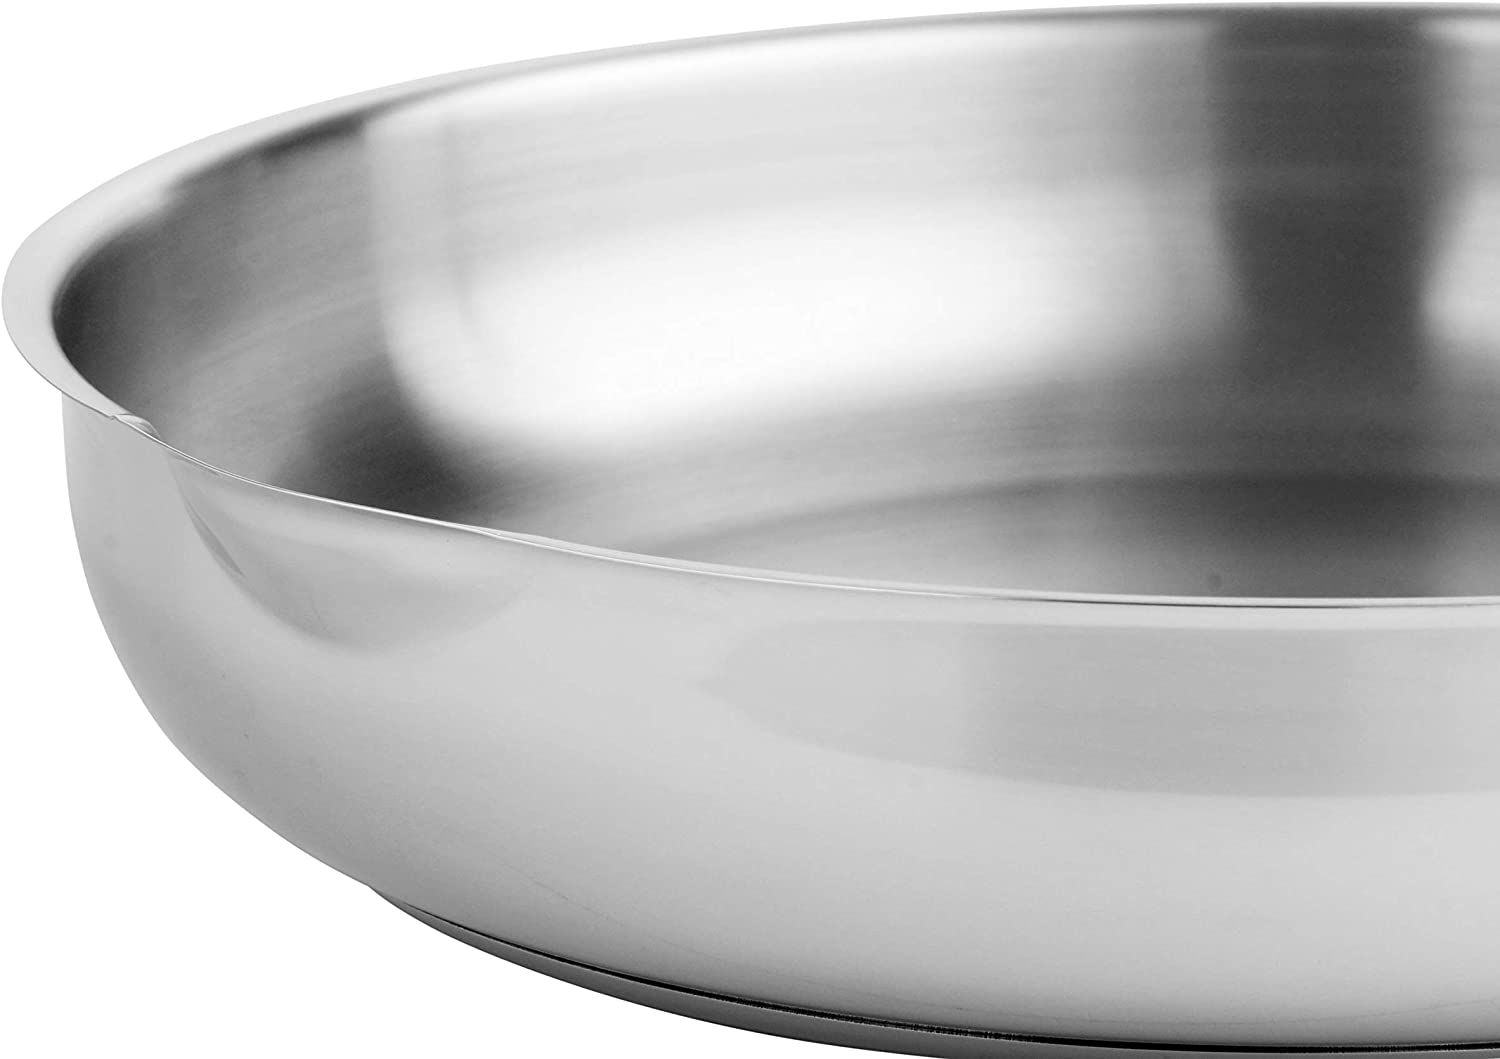 AVACRAFT 18/10 Tri-Ply Stainless Steel Frying Pan with LID. Side Spouts. Stay Co